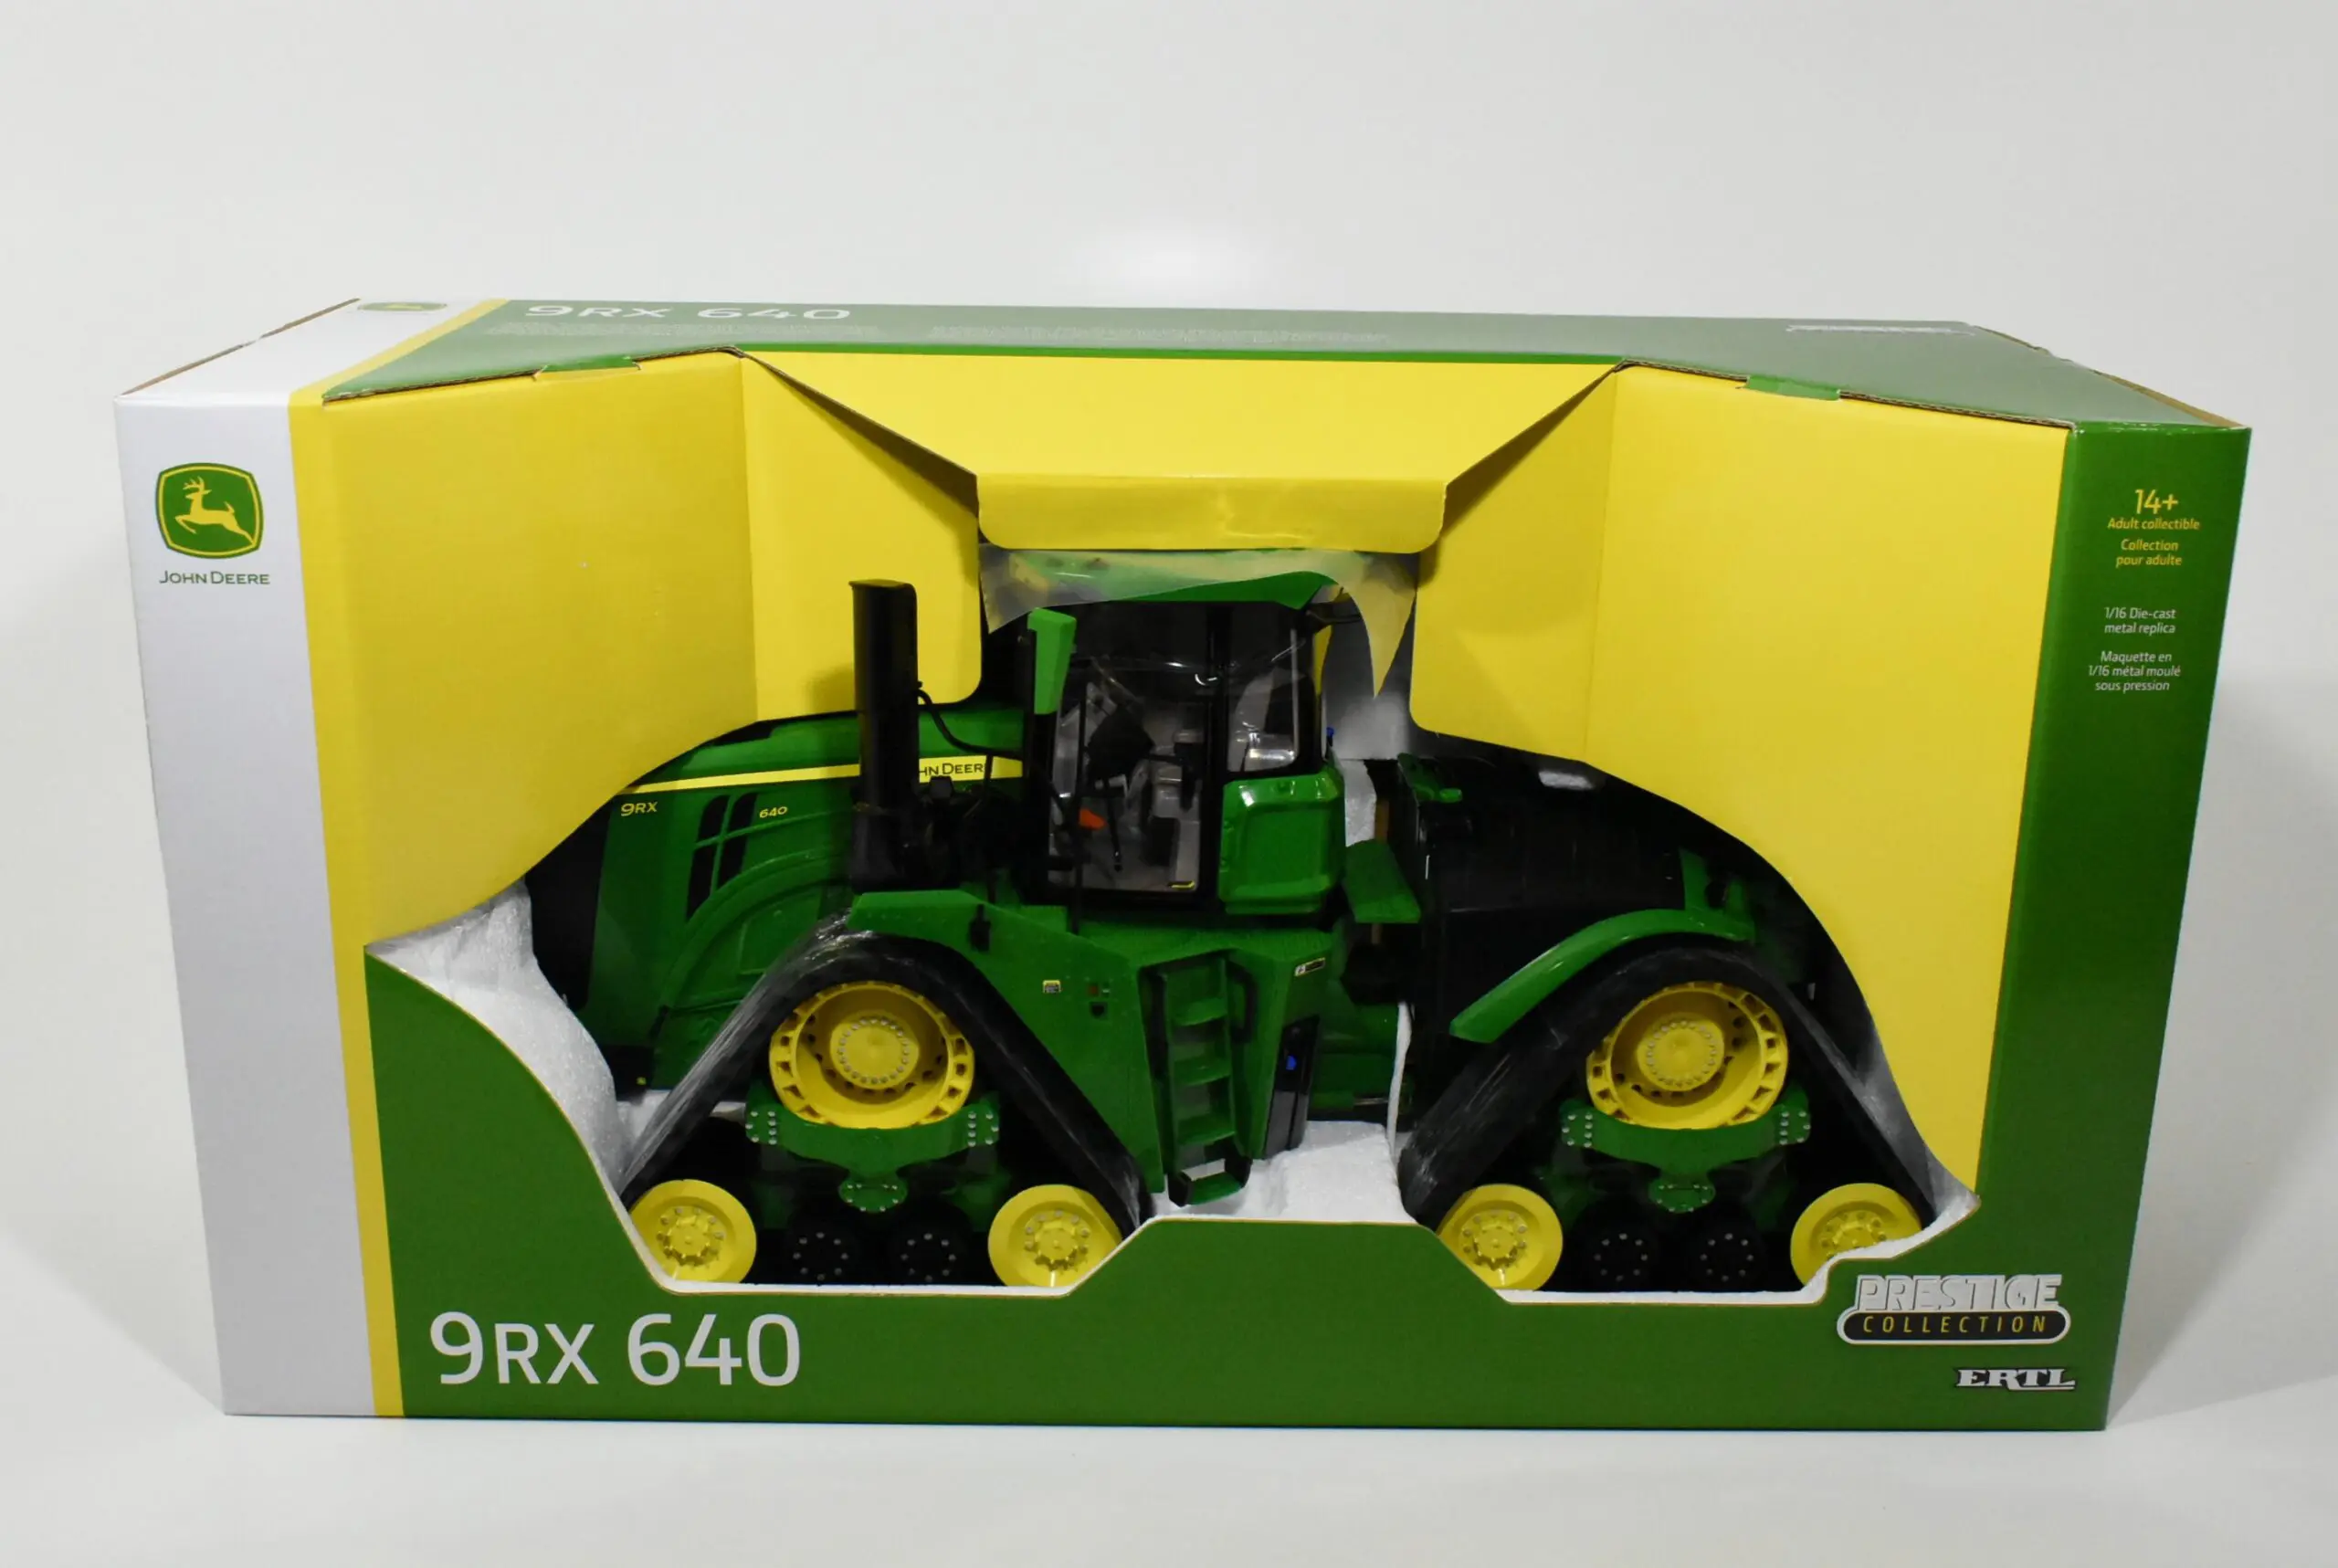 John Deere 9rx 640 Tracked 4wd Tractor